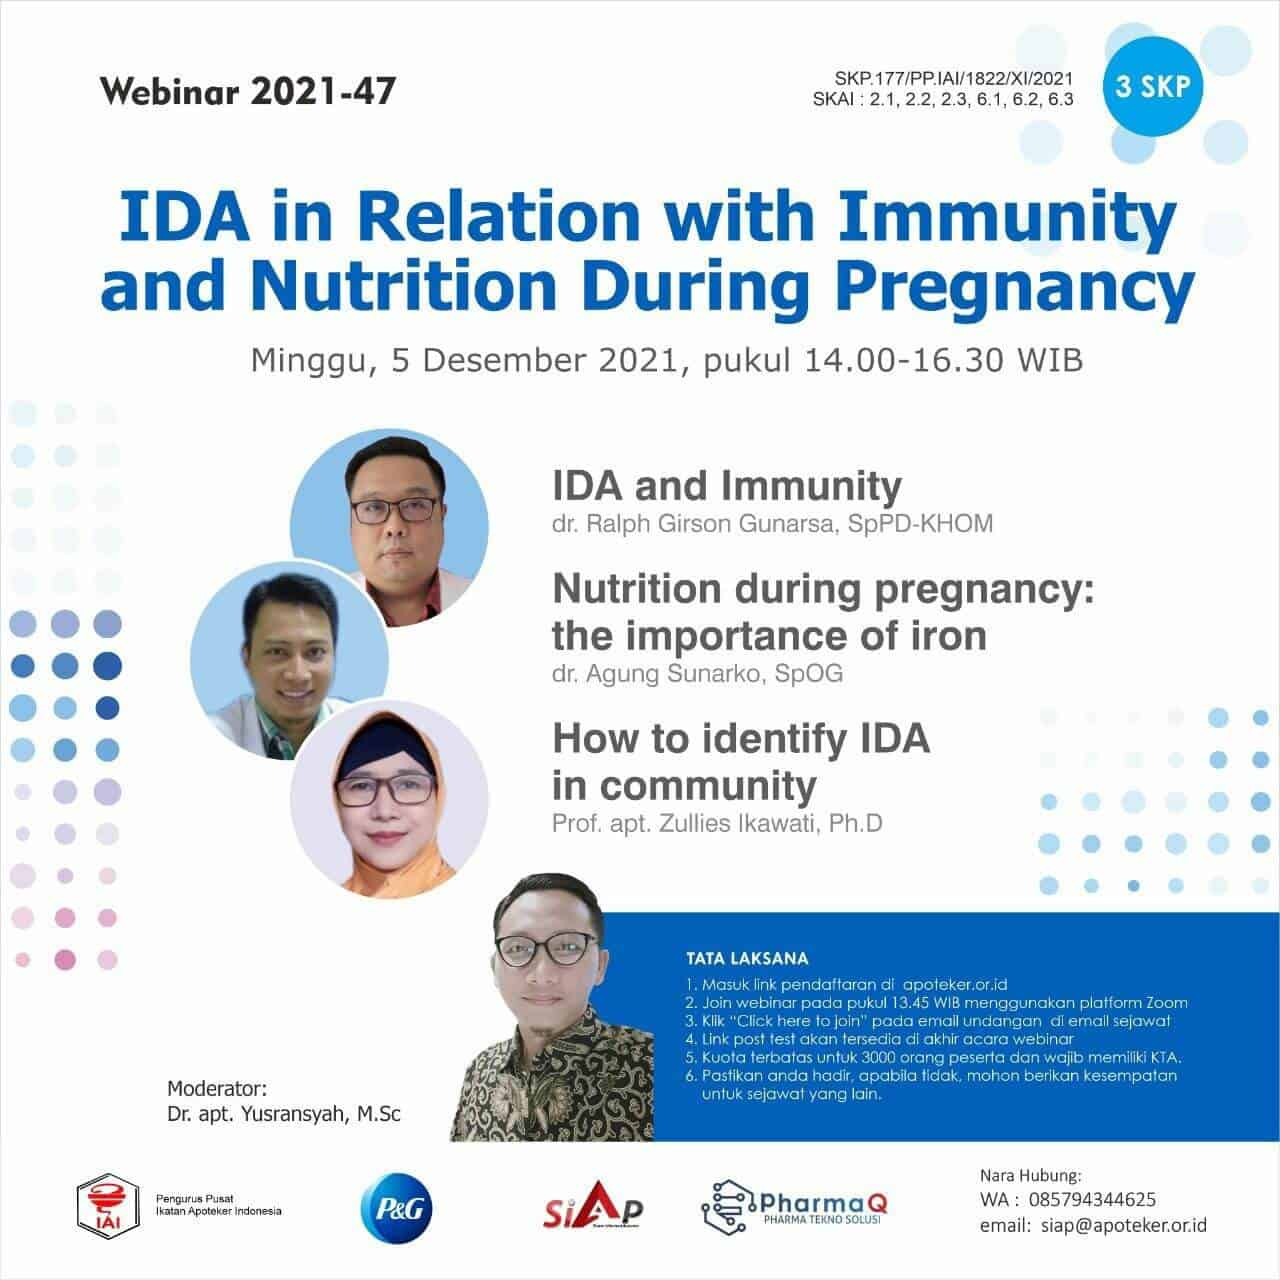 IDA in Relation with Immunity and Nutrition During Pregnancy